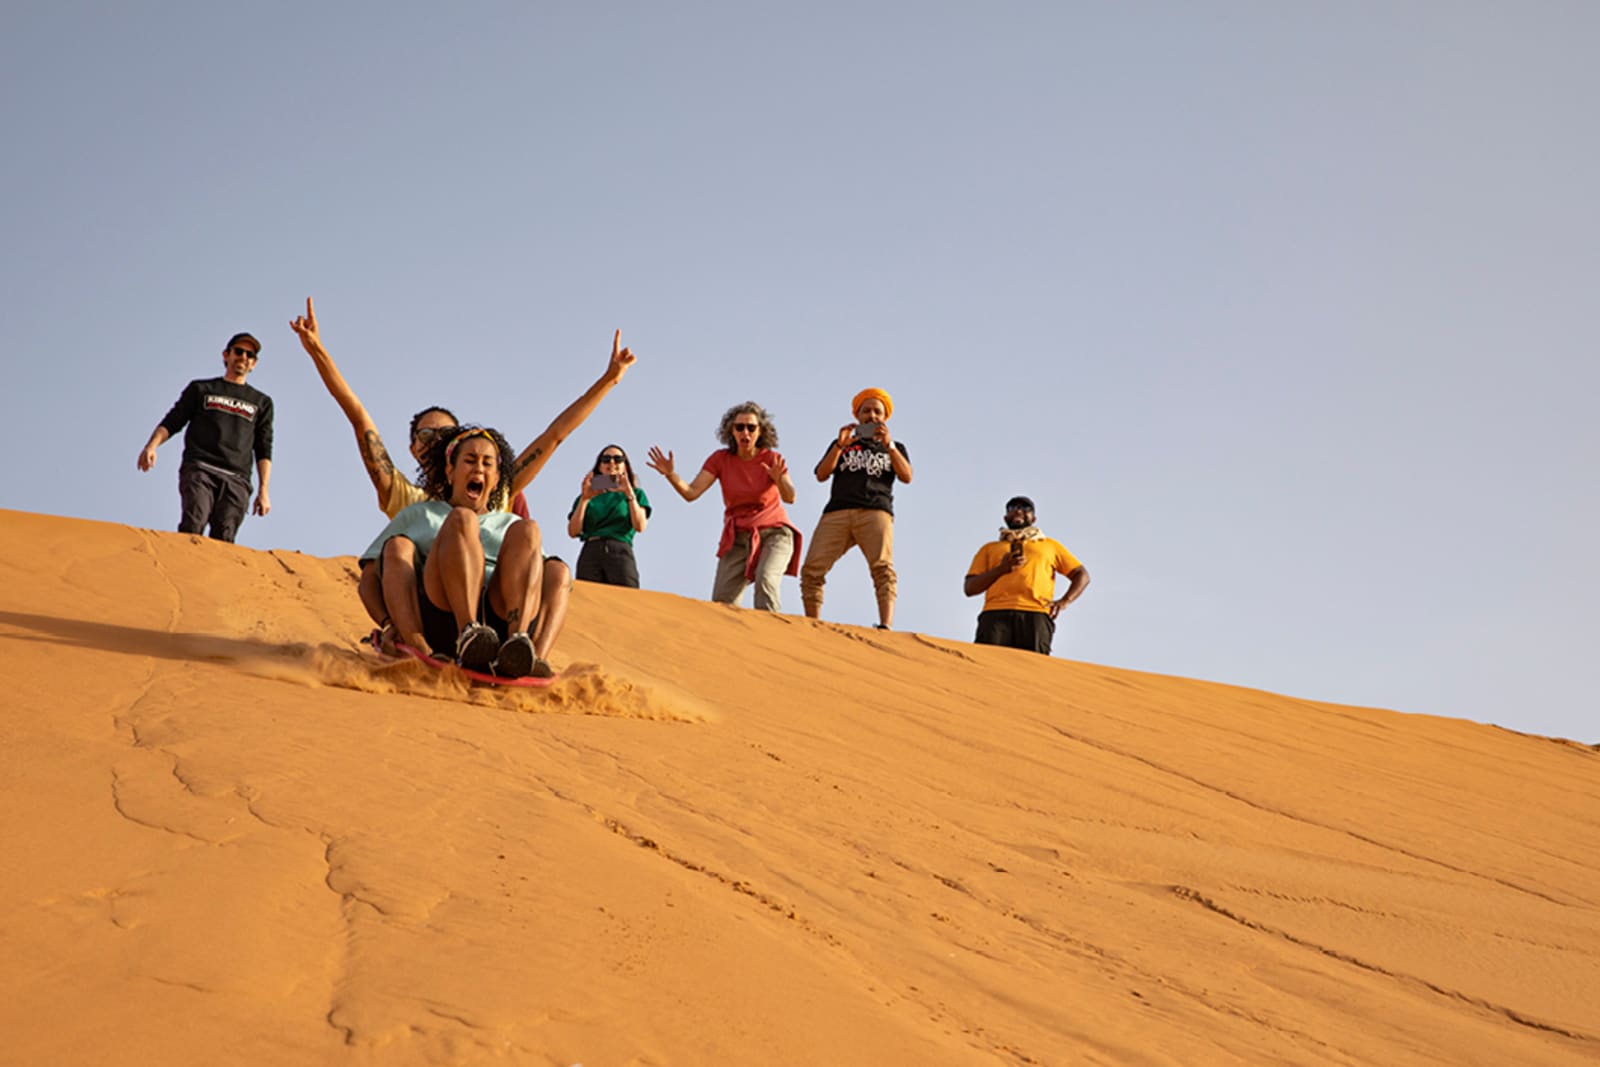 A group sledding down sand dunes in Morocco